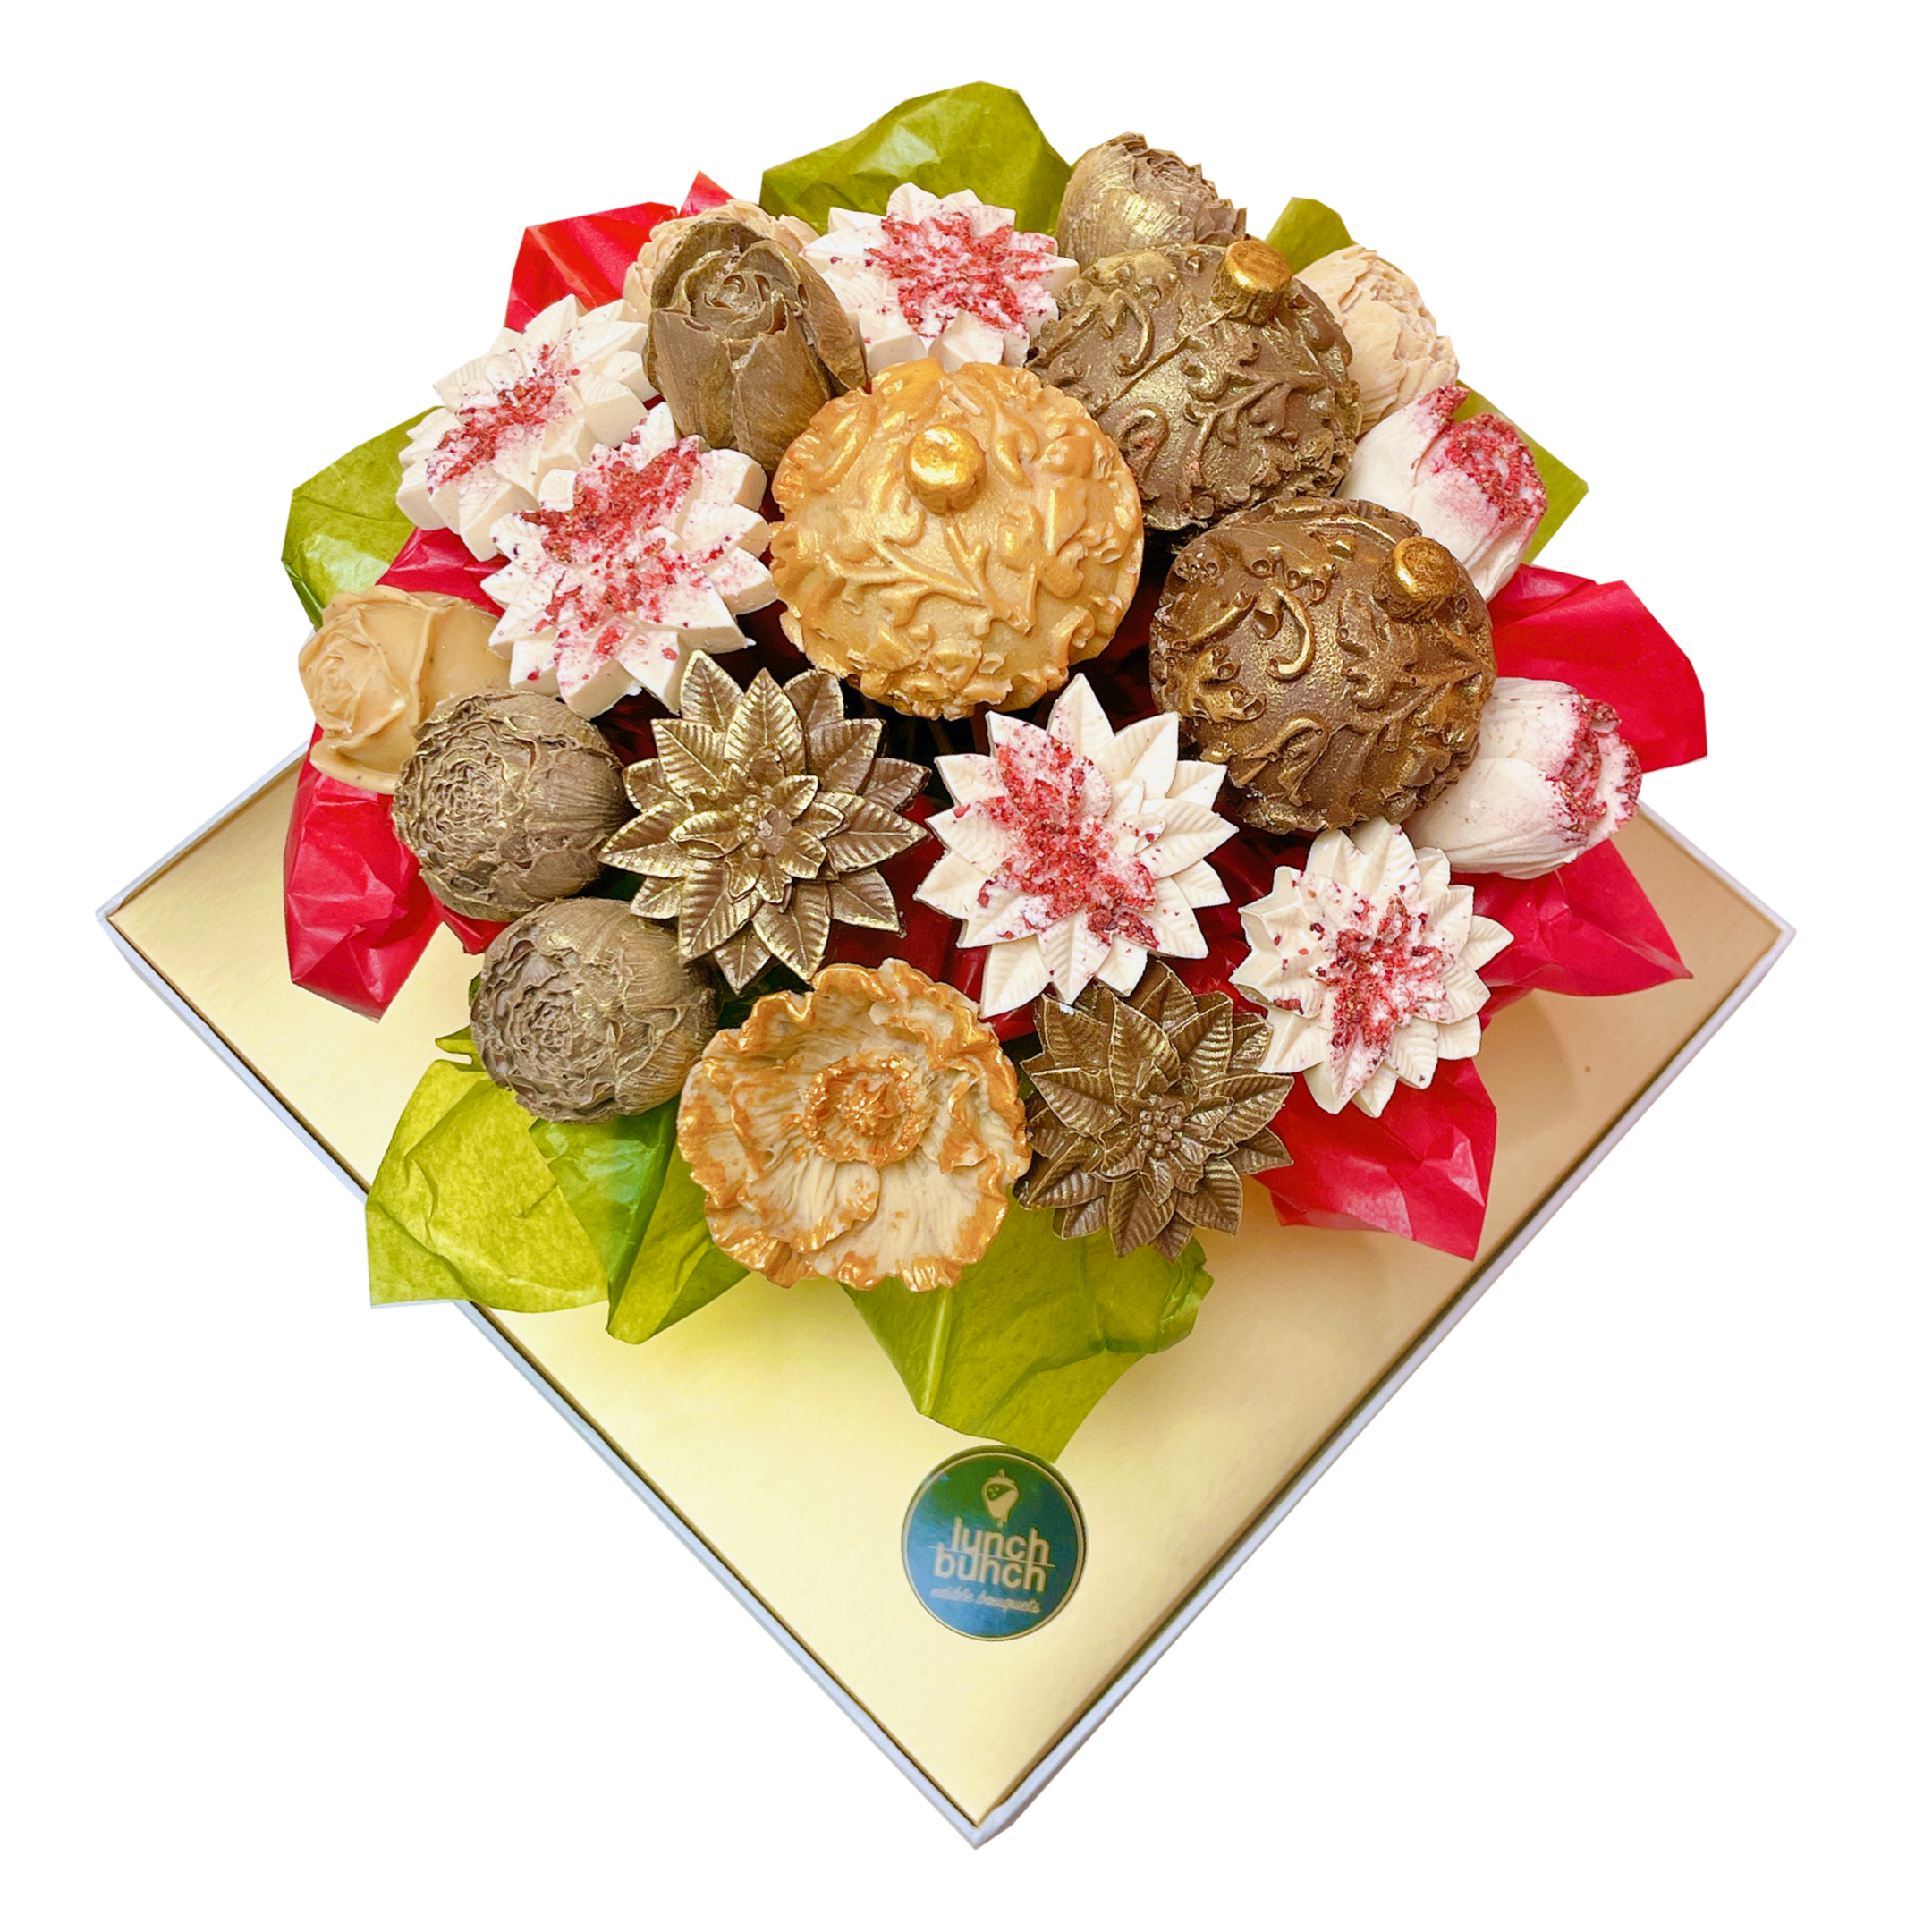 Chocolate Bouquet with Red Poinsettia Flowers, Christmas Balls Gift, Adelaide same day gift delivery, dessert box